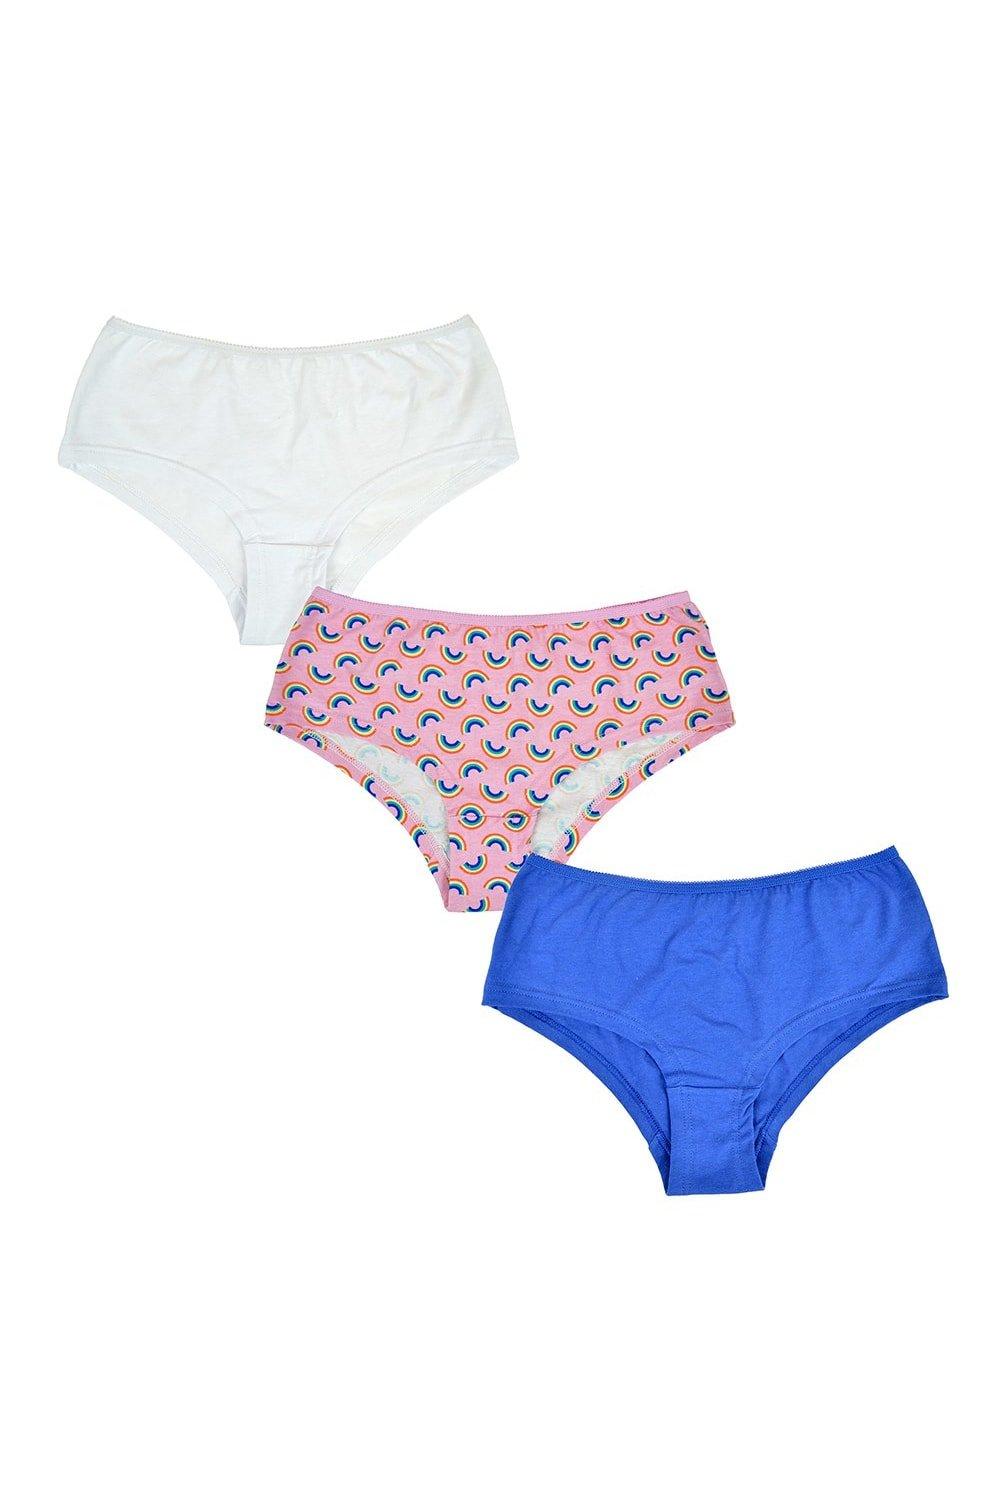 Brief Shorts (Pack Of 3)